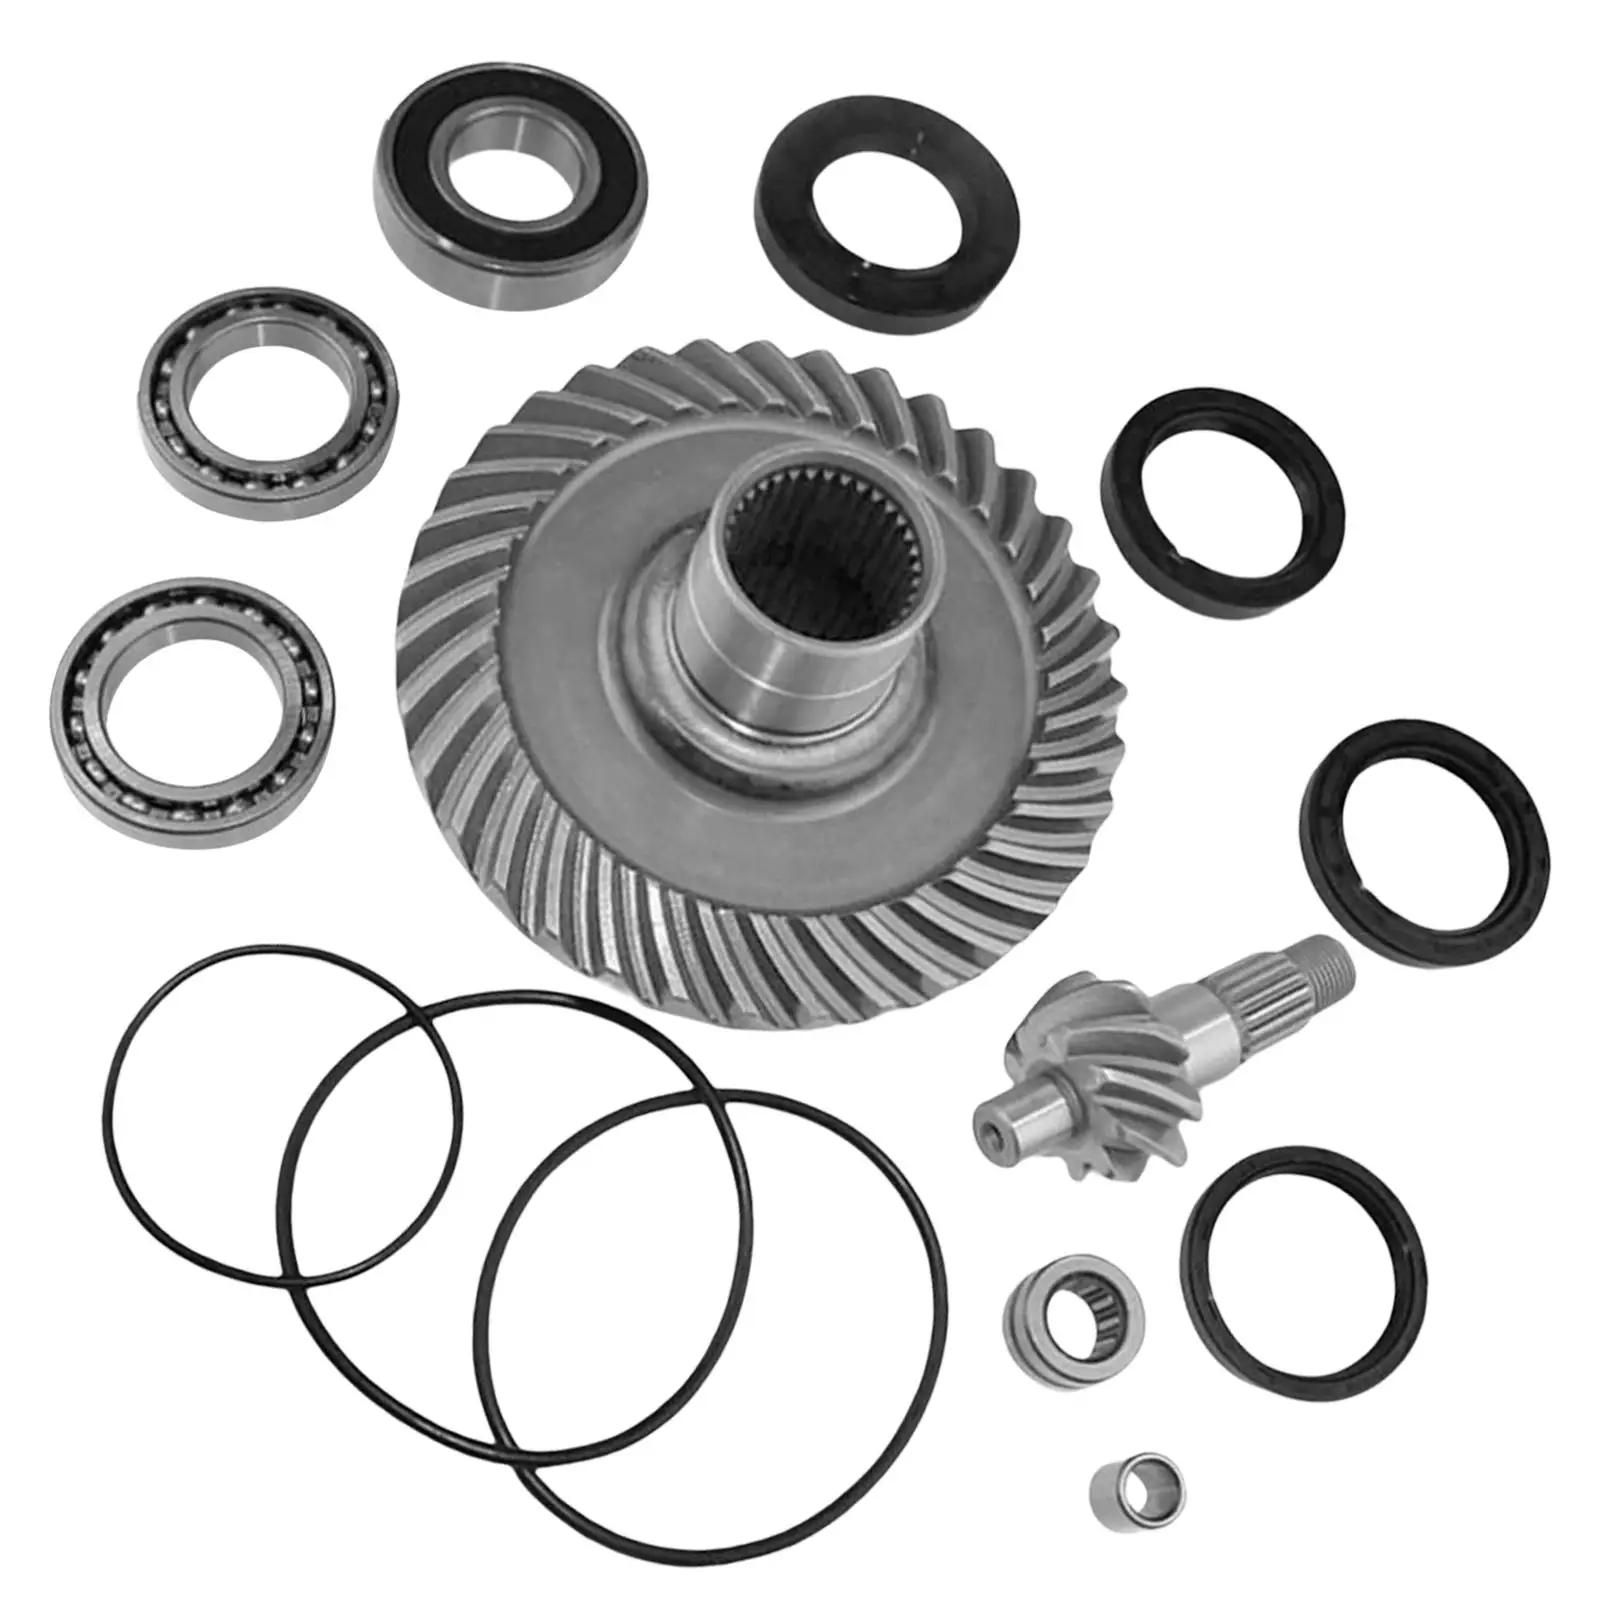 Rear Differential Ring & Pinion Gear + Bearing Kit 14Pcs/Set for Honda TRX300 88-00 Replacement Easy to Install Accessories